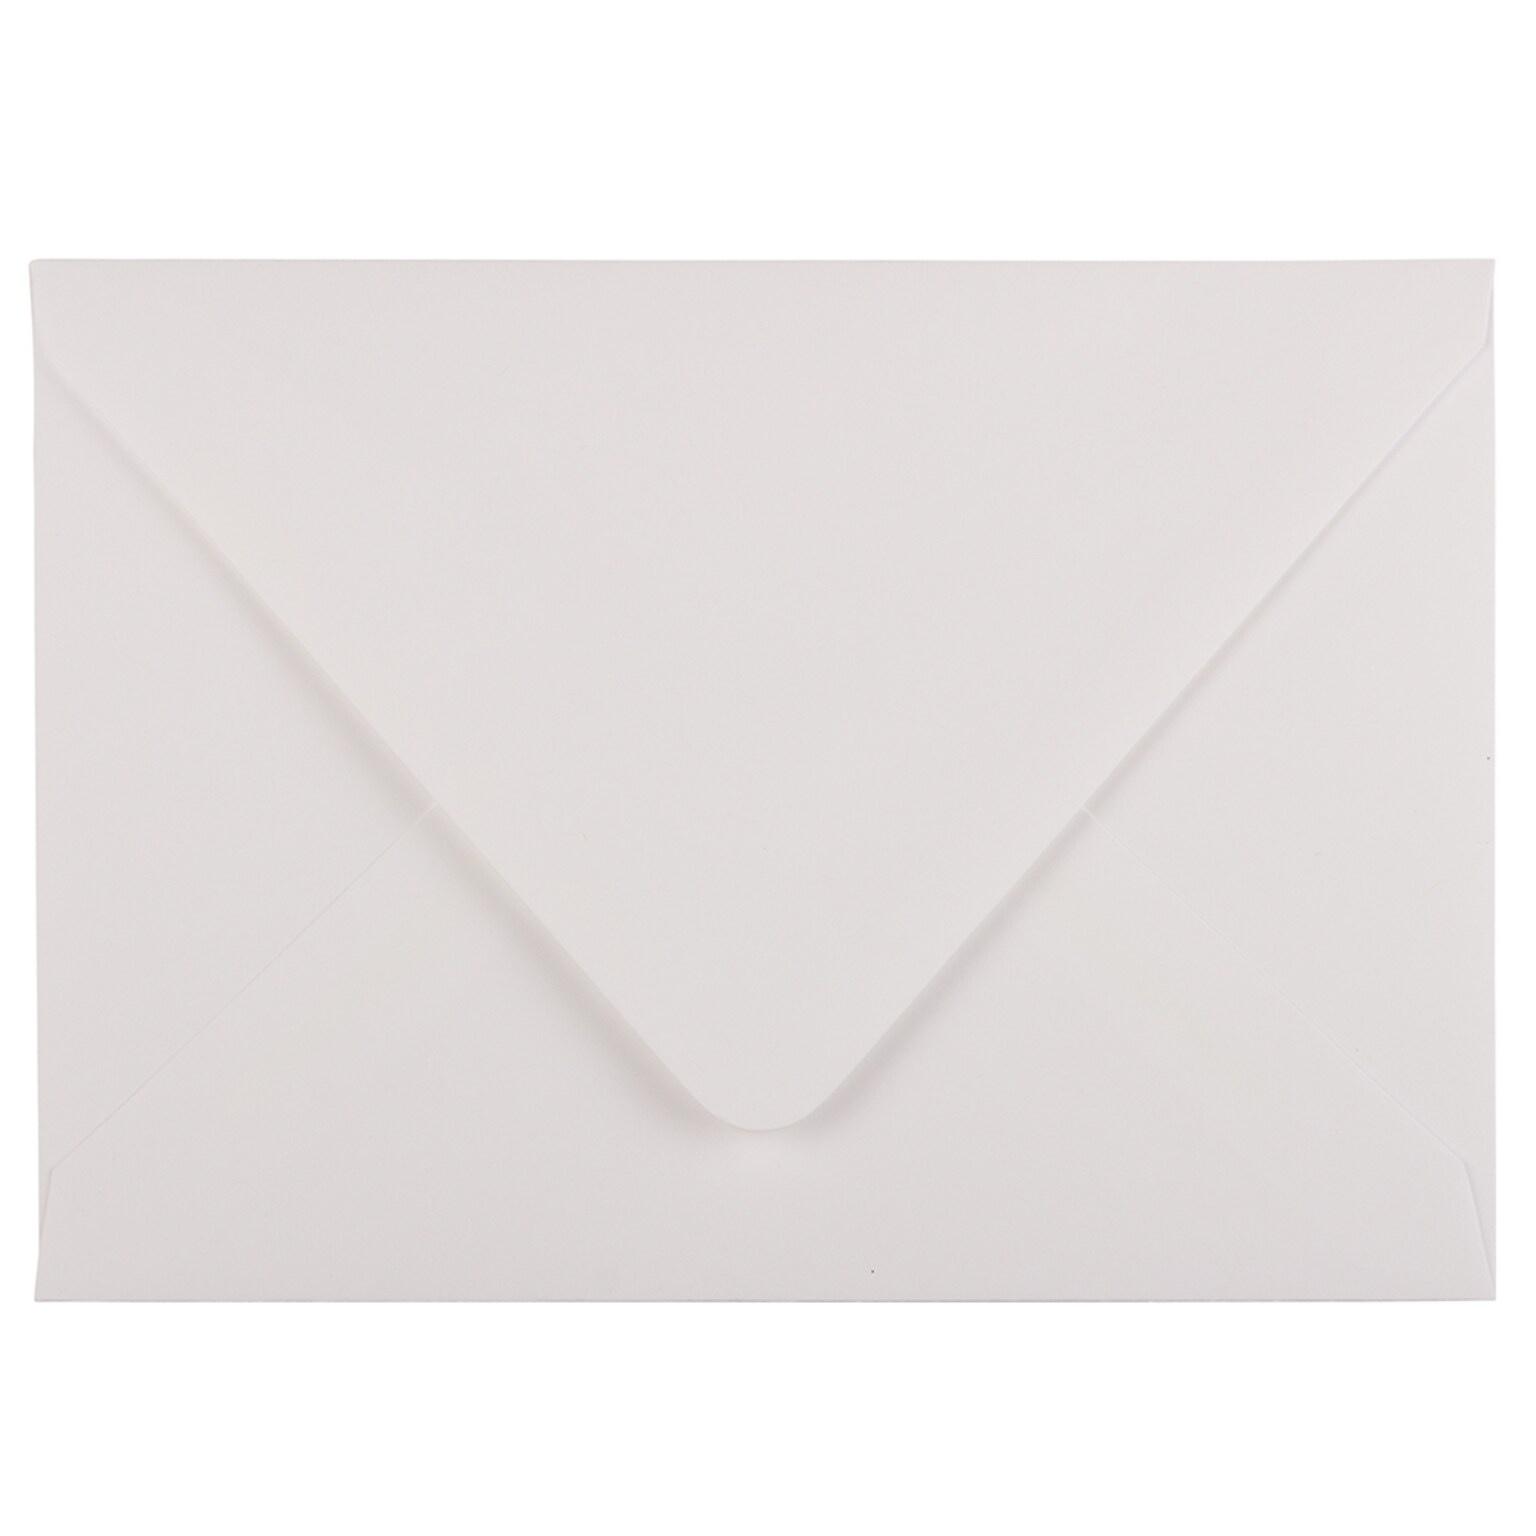 JAM Paper A7 Invitation Envelopes with Euro Flap, 5 1/4 x 7 1/4, White, 50/Pack (40234670I)